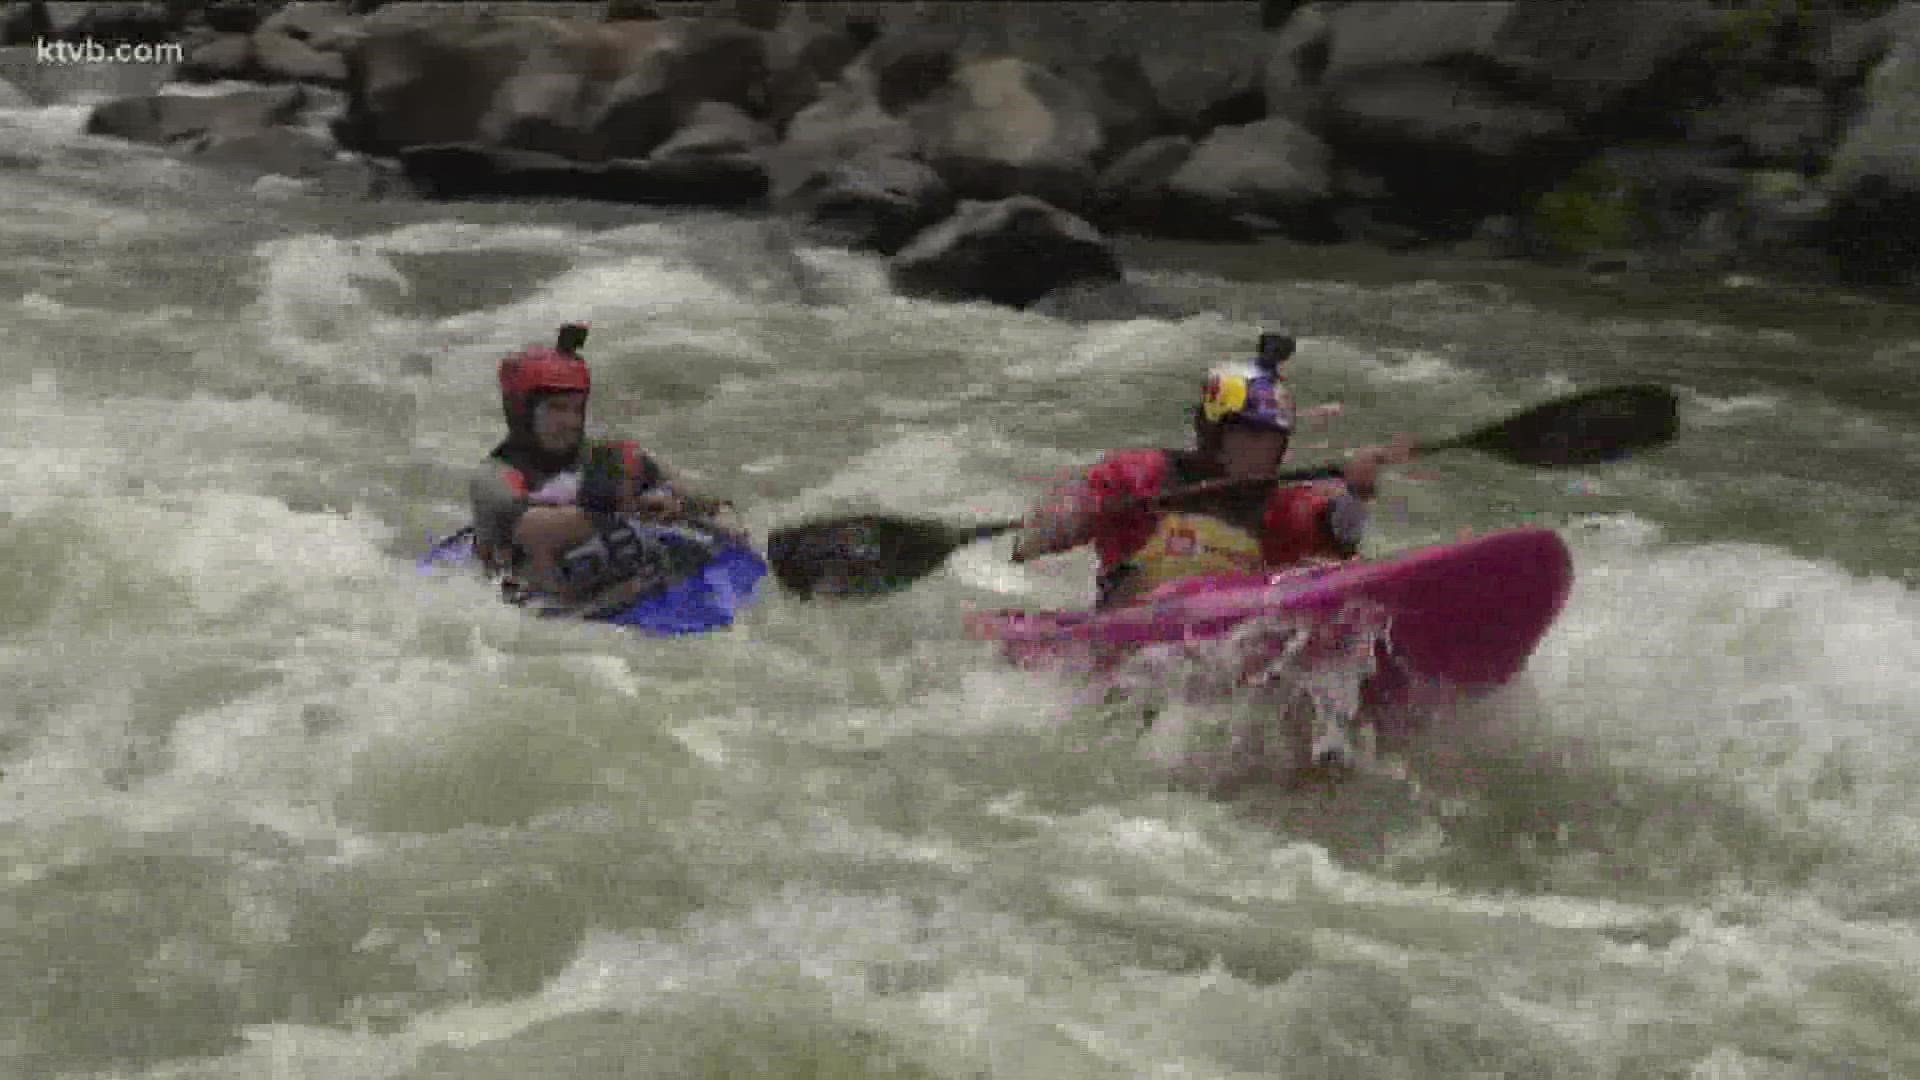 The North Fork Championship brings the most well-respected kayakers to the Payette River near Banks, Idaho. Sunday's 1 p.m. main event rounds out the competition.